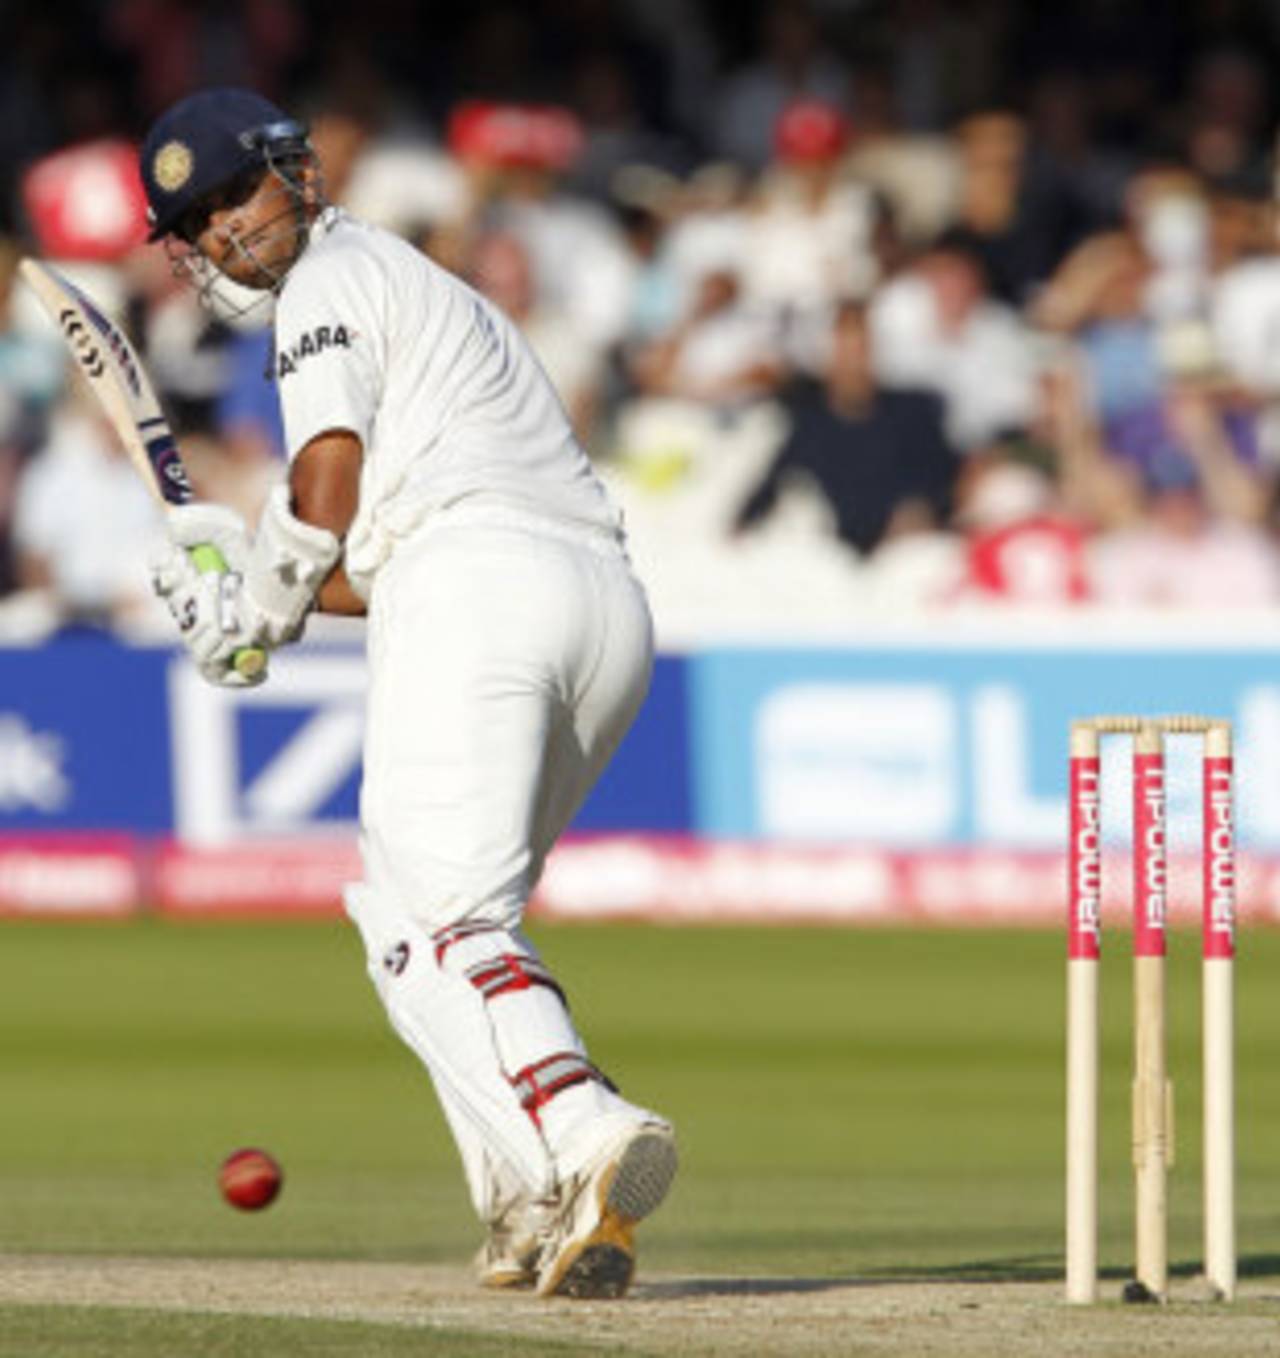 Rahul Dravid glances fine on the leg side, England v India, 1st Test, Lord's, 4th day, July 24, 2011